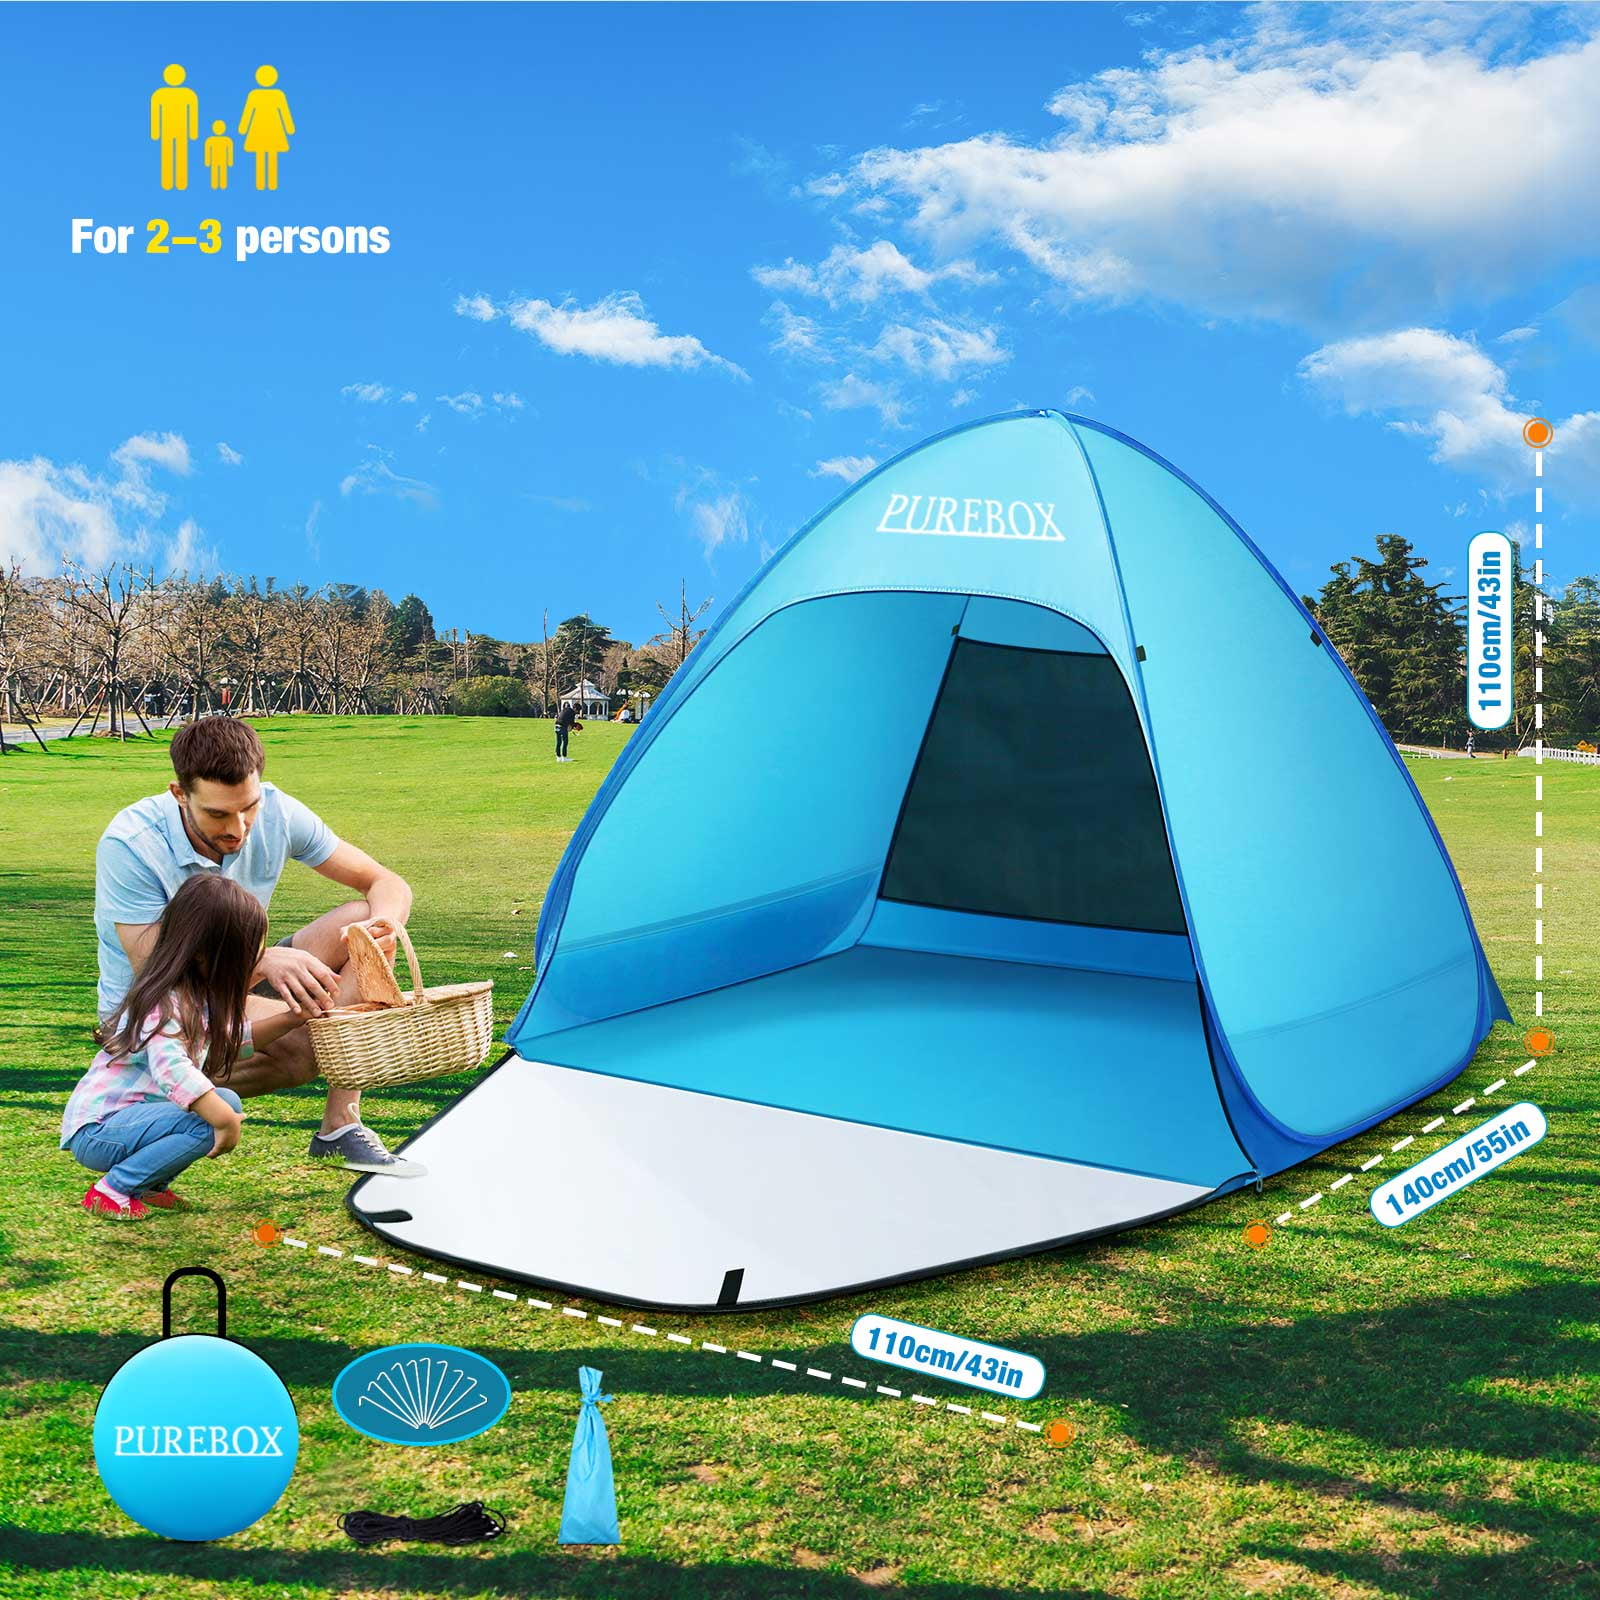 Portable lightweight Pop Up Hiking Tent Camp Fishing Outdoor Shelter 1-2 Persons 